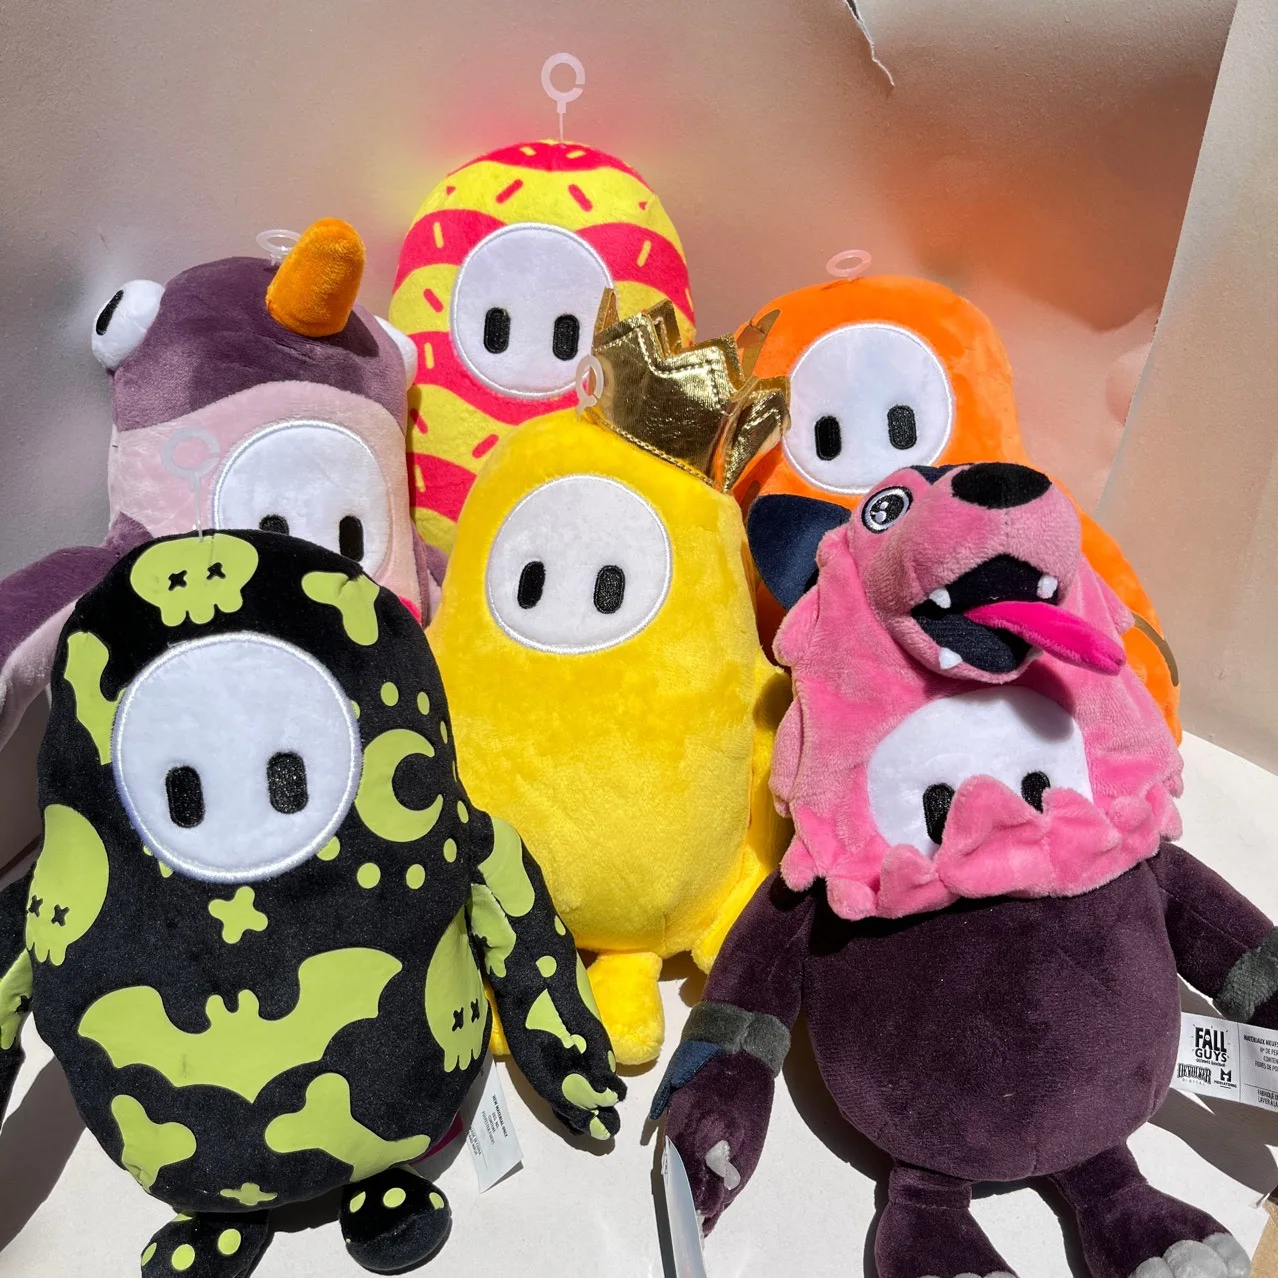 

New Fall Guys Plush Doll Game Figure Plush Stuff Toy Fall Guys: Ultimate Knockout Children Christmas Birthday Toys Gift